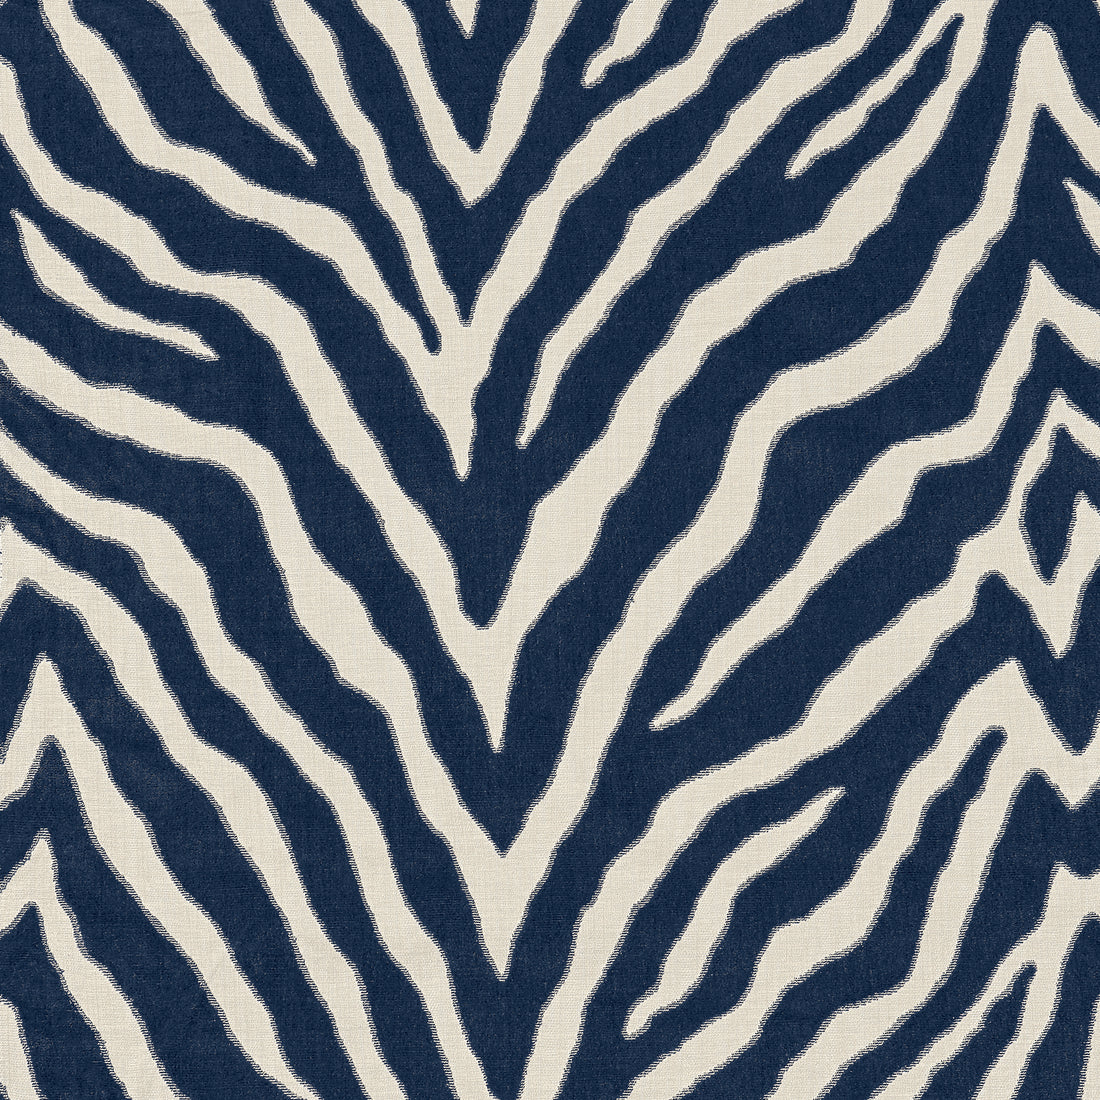 Etosha Velvet fabric in navy color - pattern number W80408 - by Thibaut in the Woven Resource Vol 10 Menagerie collection